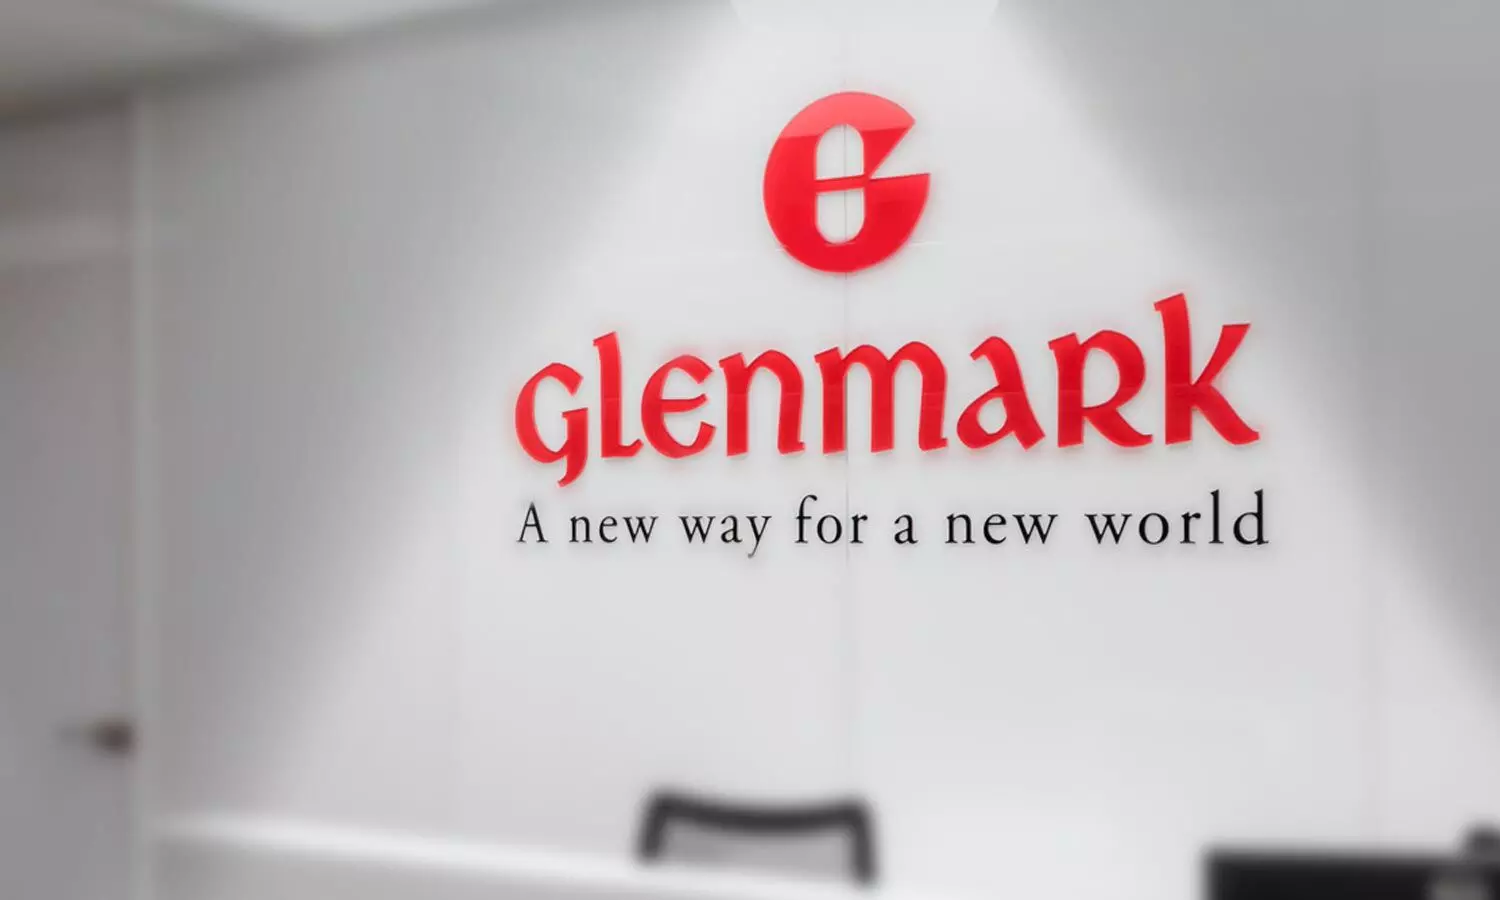 Glenmark arm to invest Rs 600 crore to double capacity in 4 years